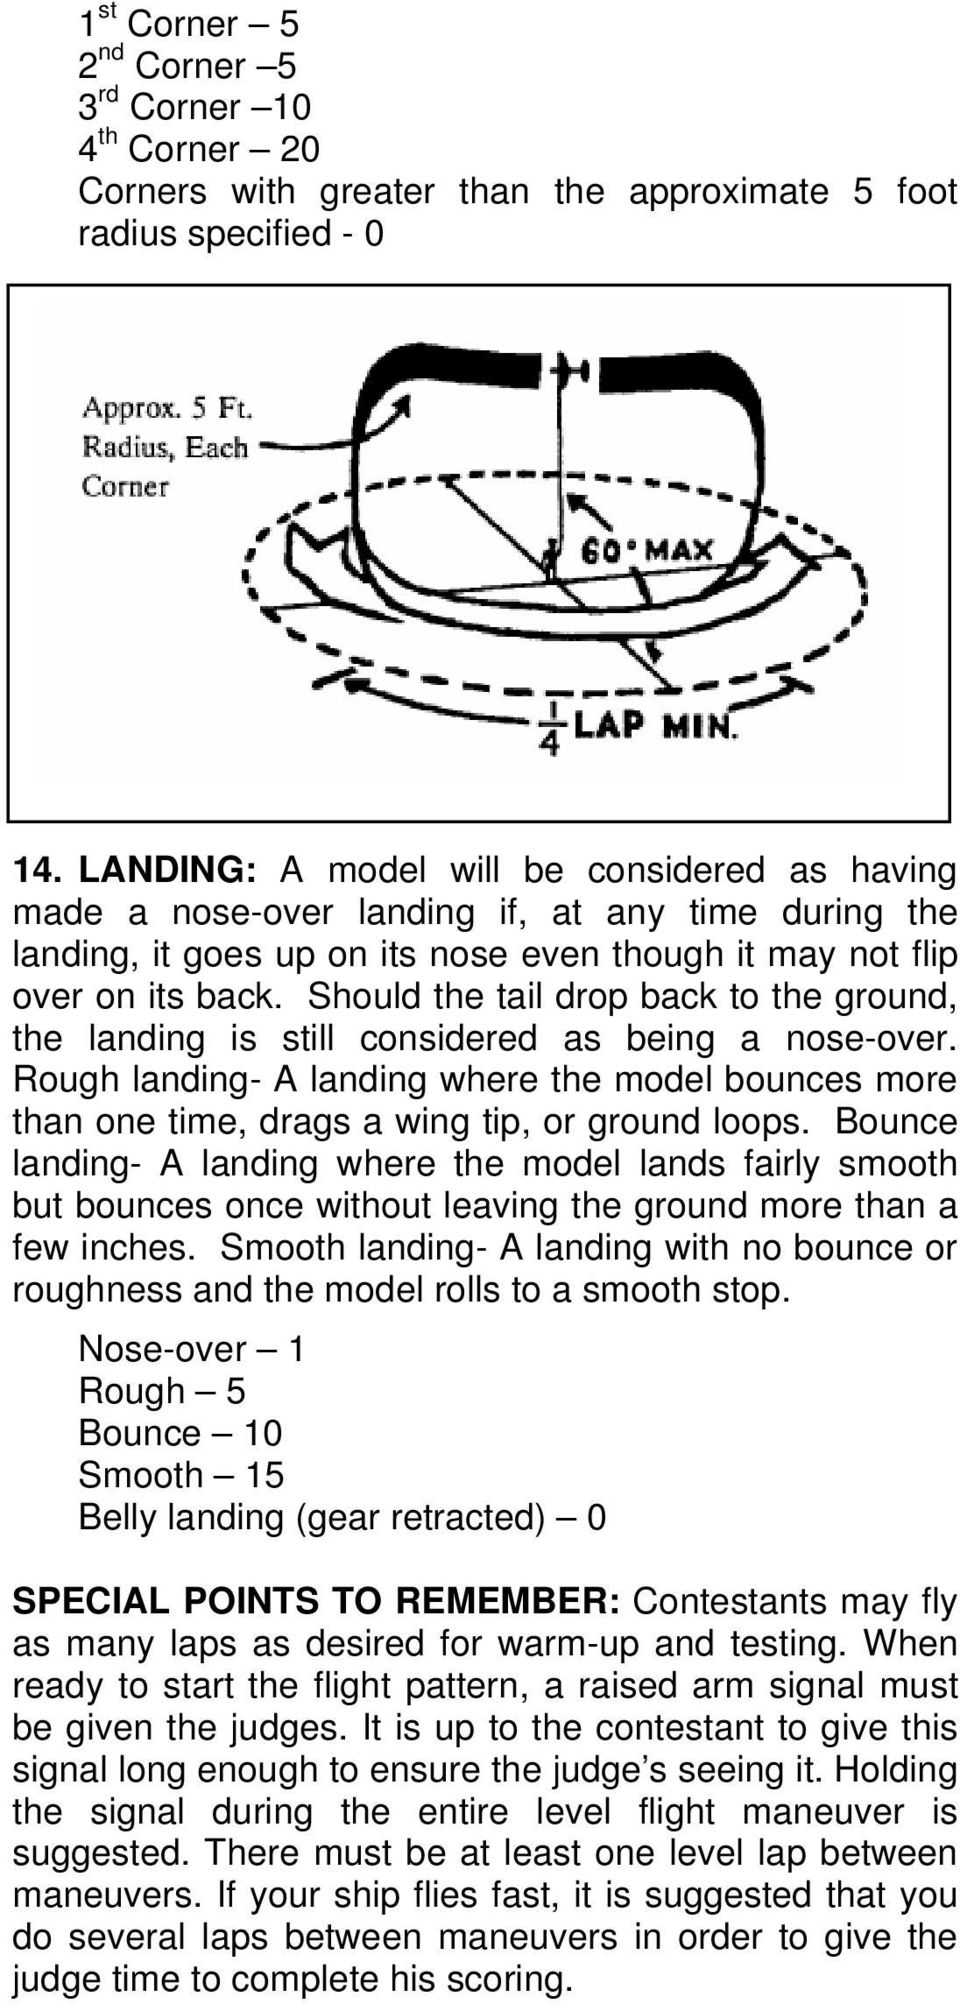 Should the tail drop back to the ground, the landing is still considered as being a nose-over. Rough landing- A landing where the model bounces more than one time, drags a wing tip, or ground loops.